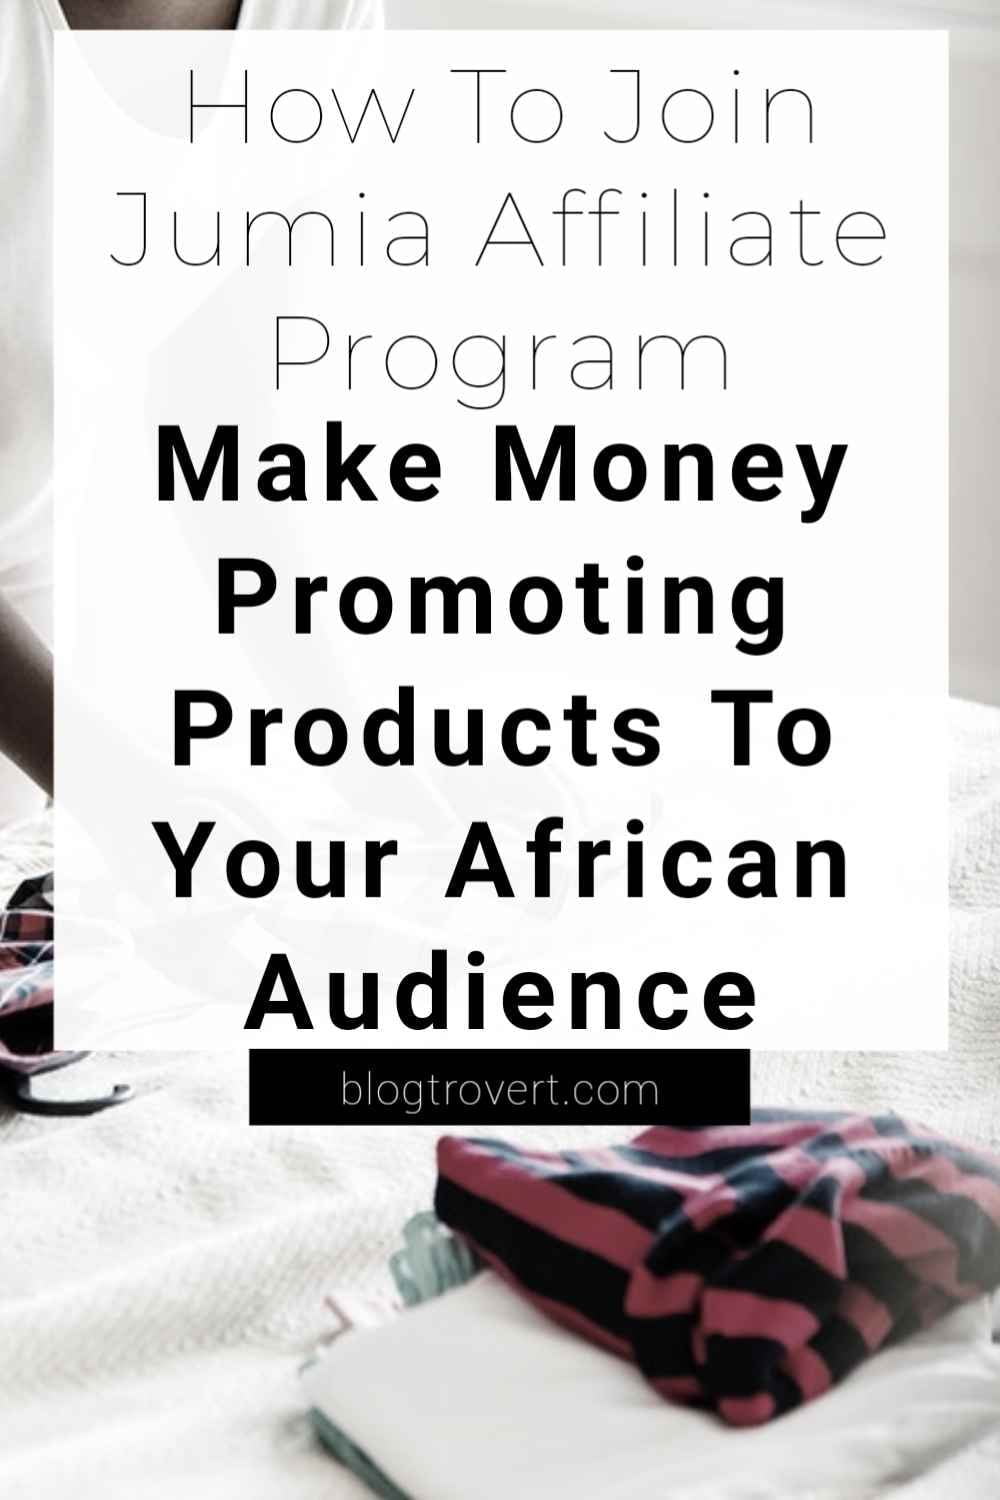 How to join Jumia affiliate program - a step-by-step guide 1